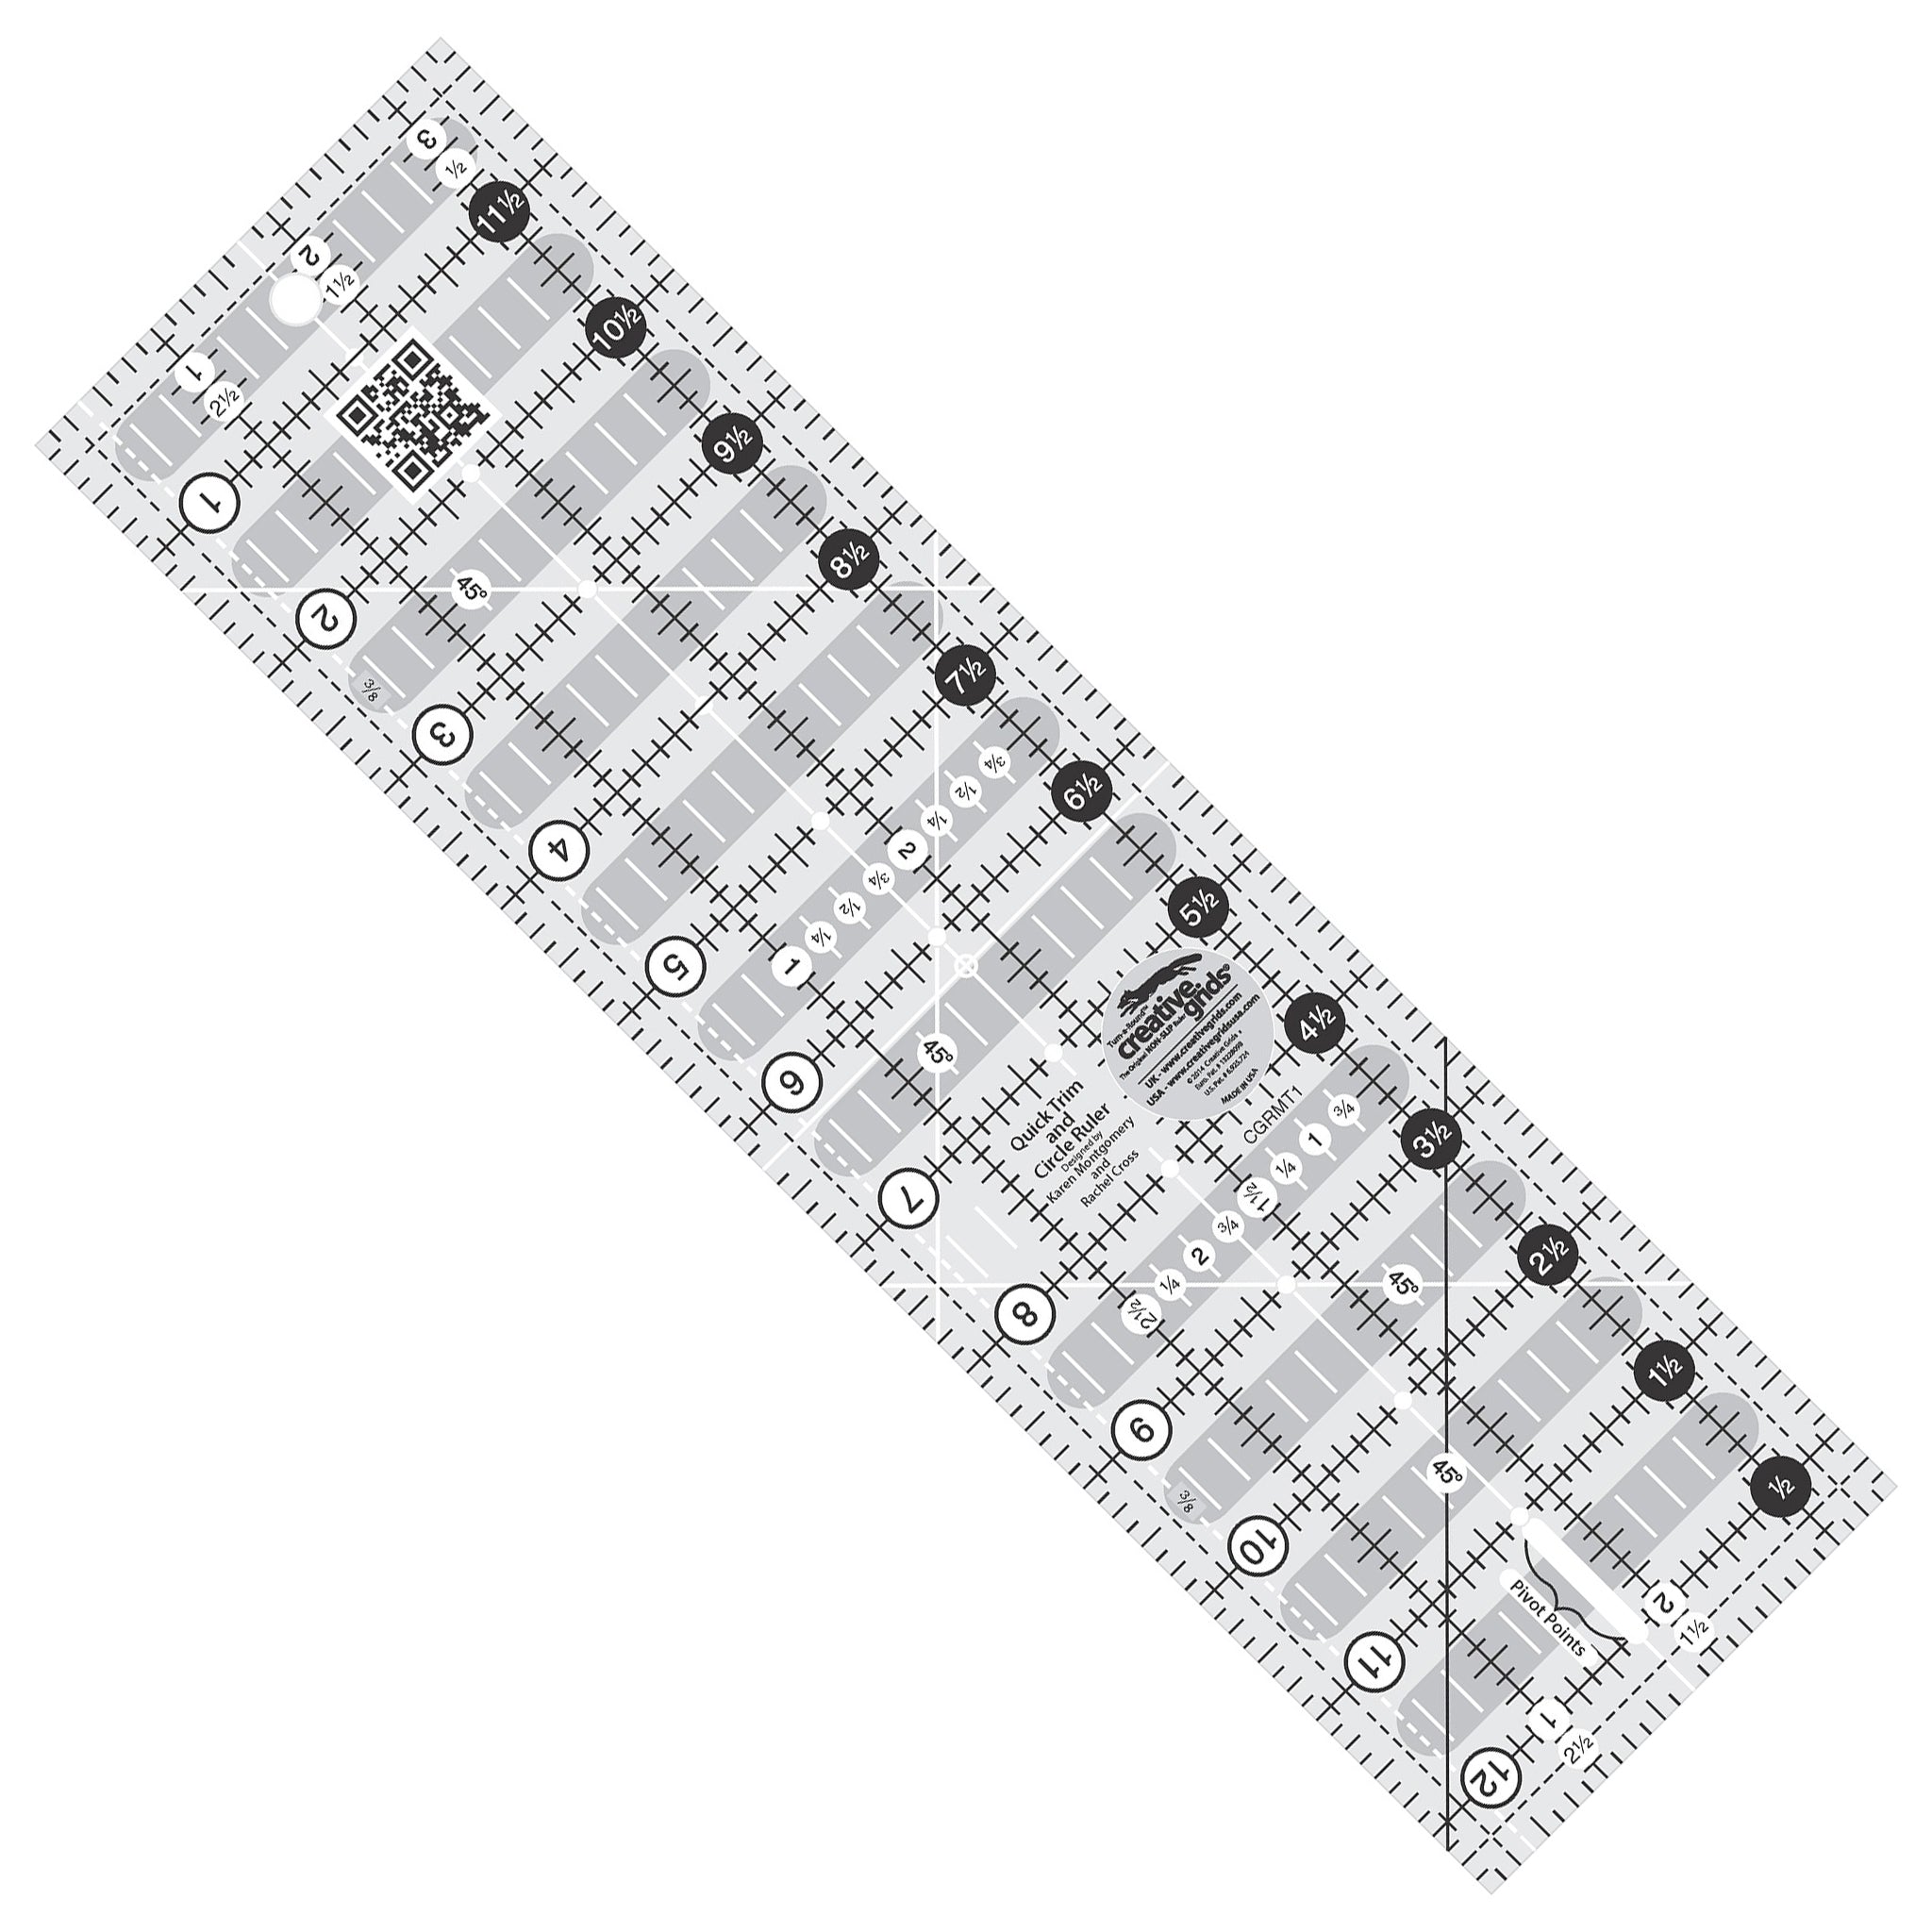 Creative Grids Quilt Ruler 3-1/2in x 6-1/2in